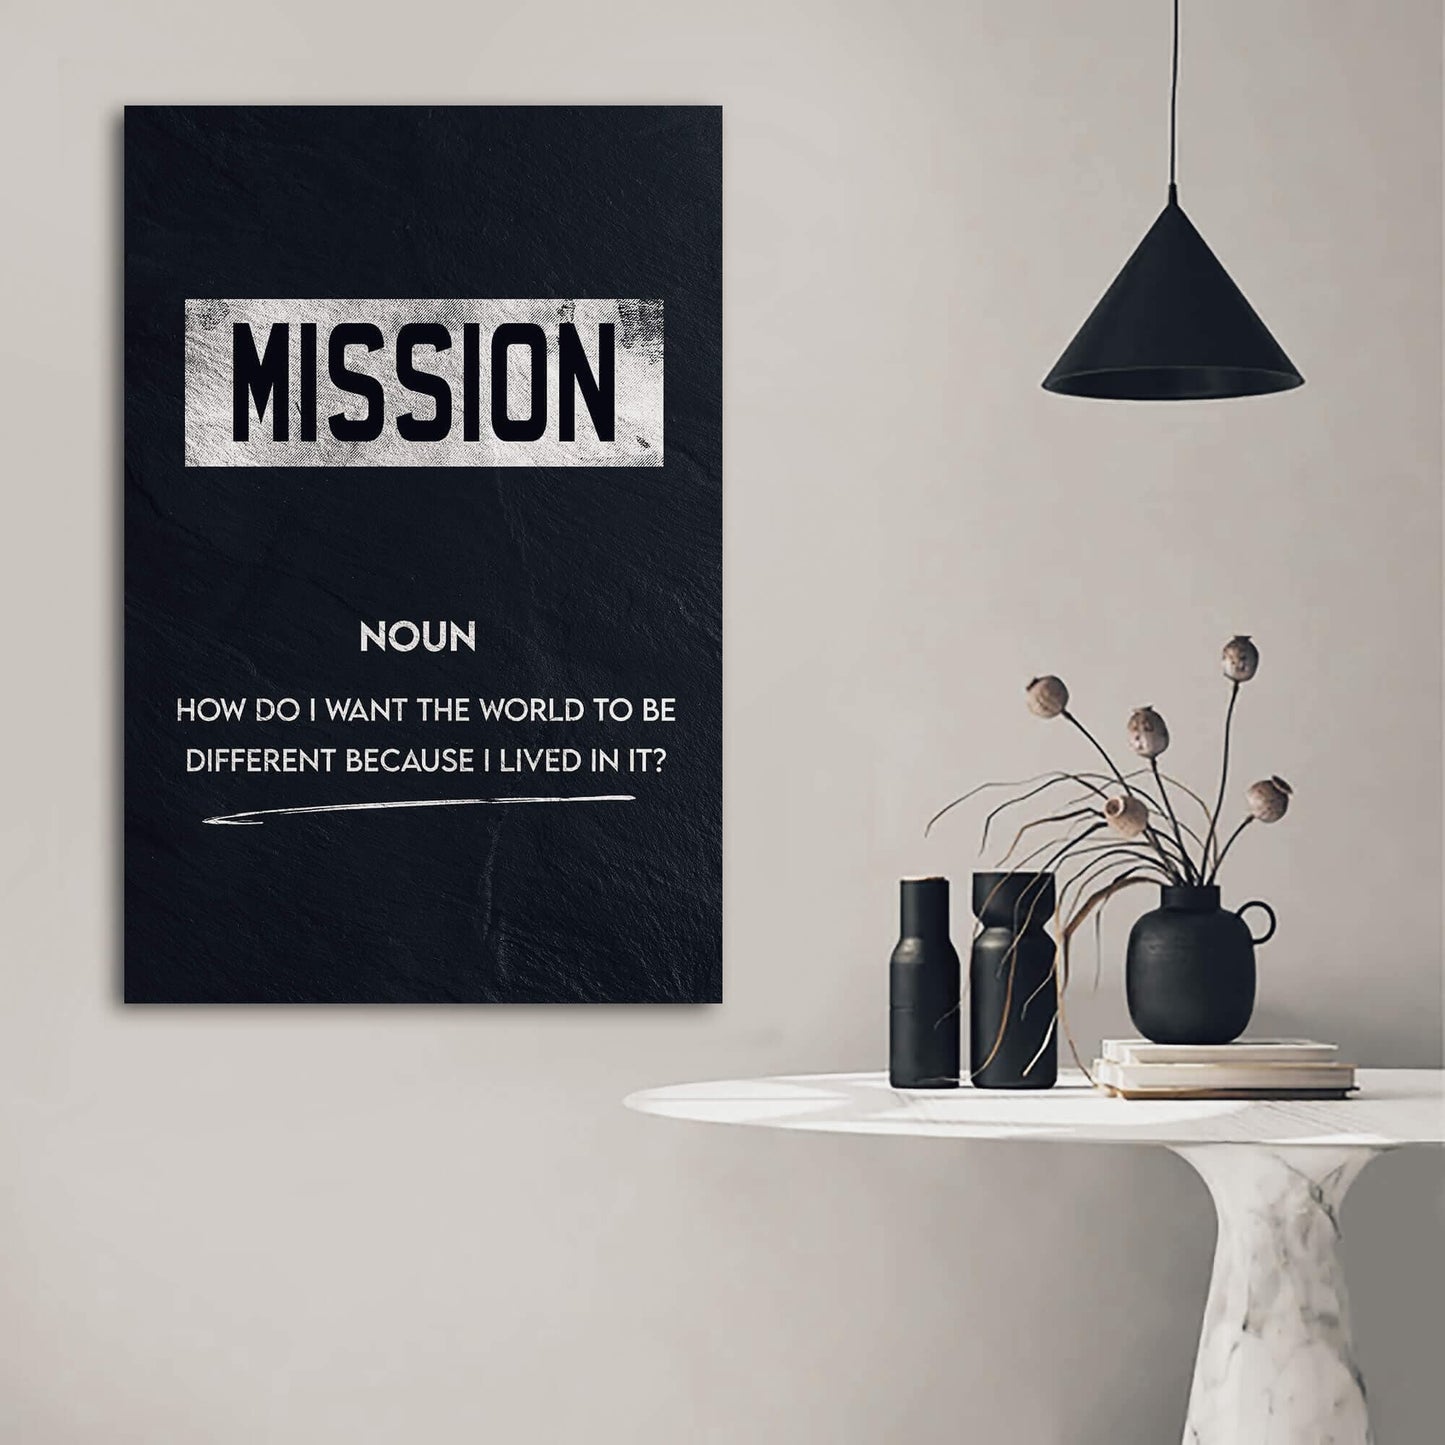 Mission Meaning Wall Art | Inspirational Wall Art Motivational Wall Art Quotes Office Art | ImpaktMaker Exclusive Canvas Art Portrait